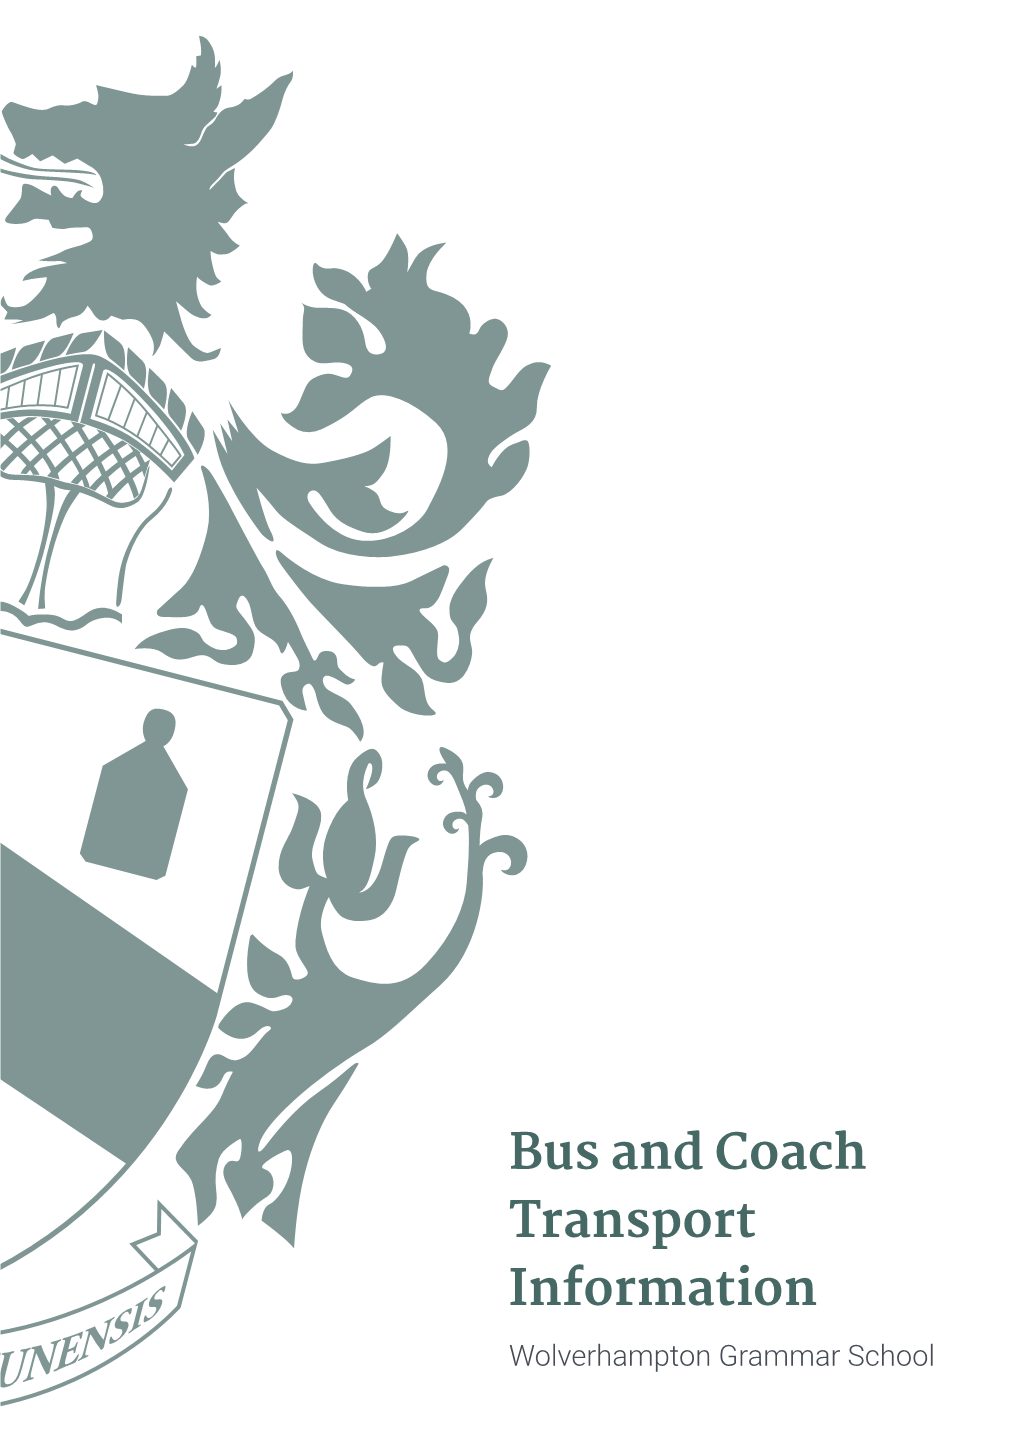 Bus and Coach Transport Information